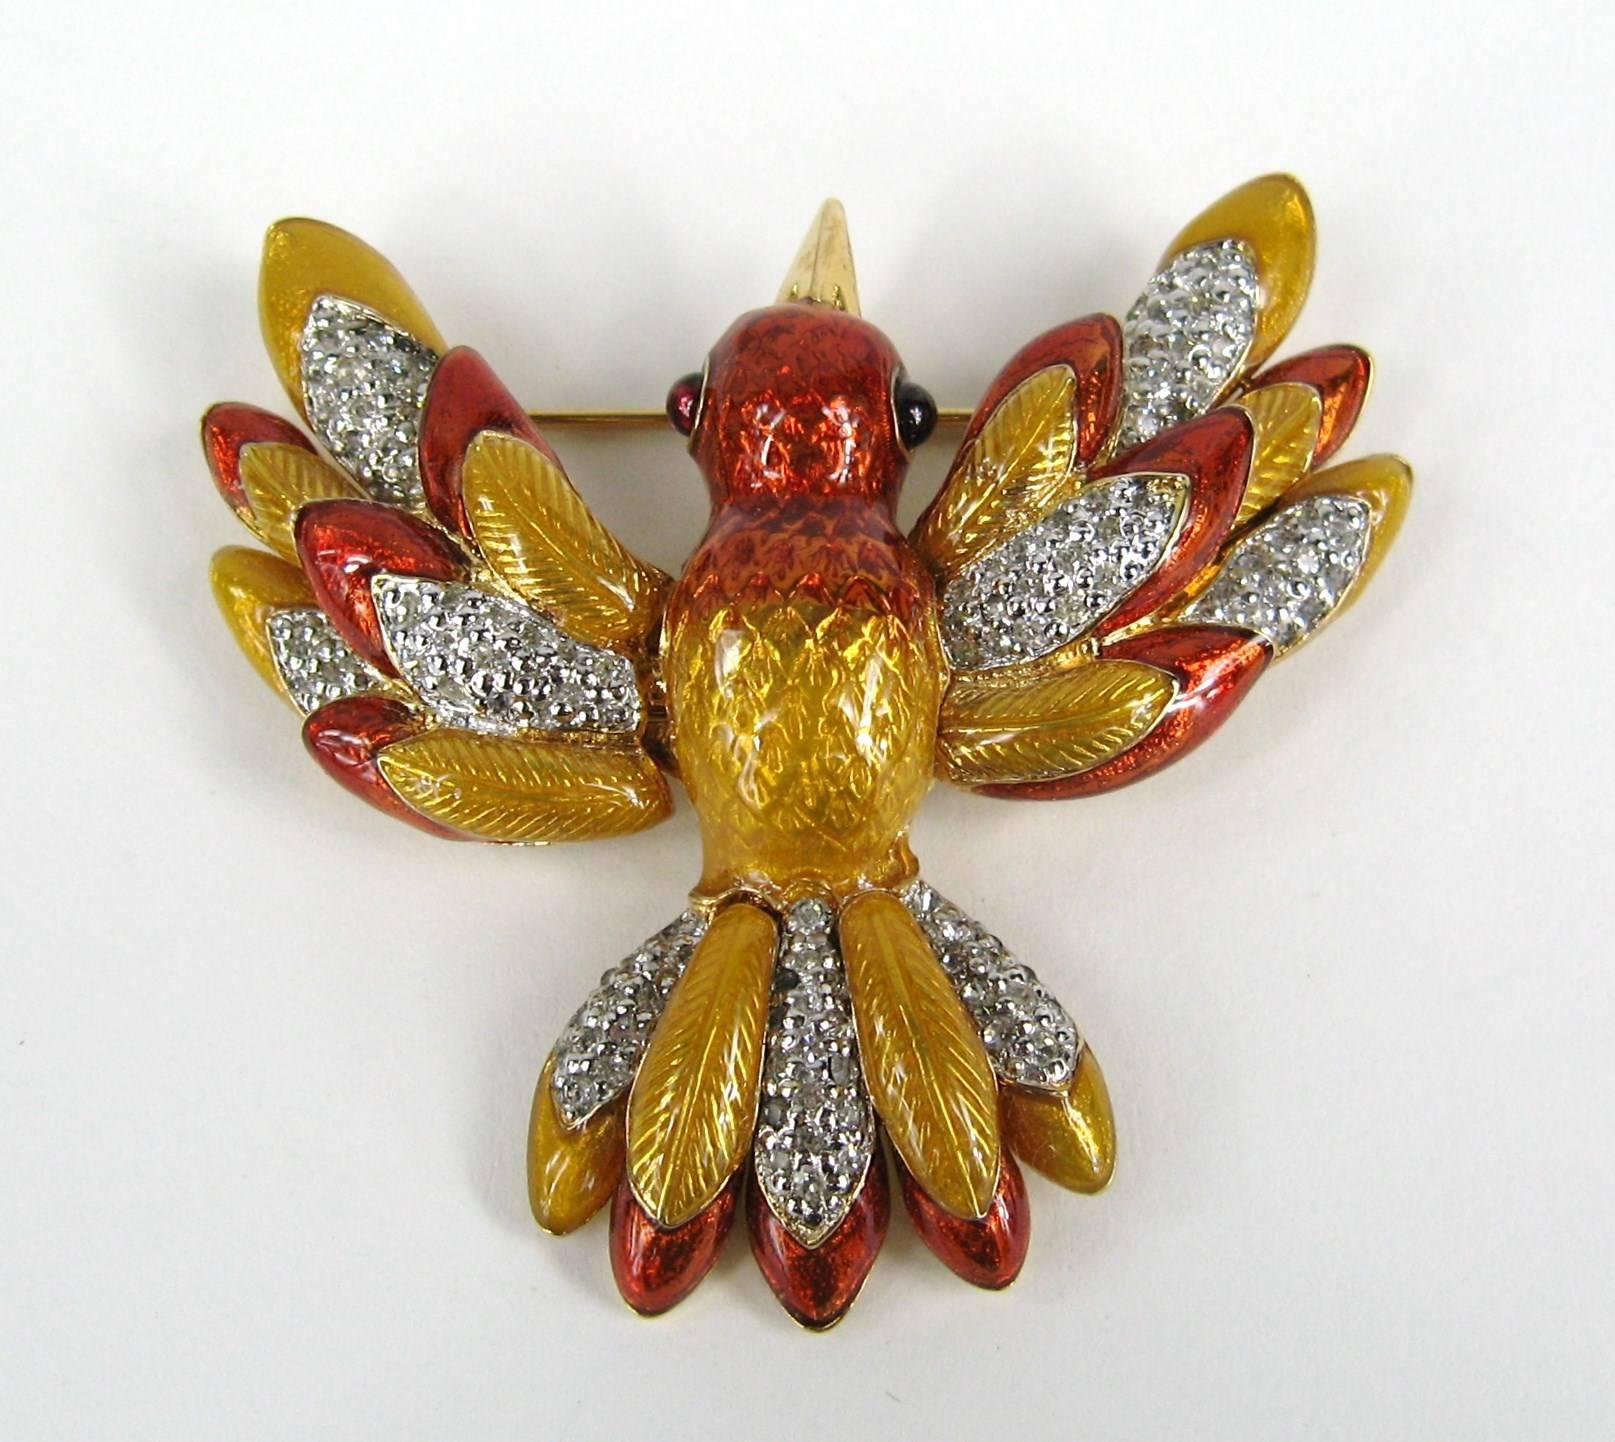 24K gold plated Judith Leiber Hummingbird brooch in the original box. This glorious bird has riveted construction and has wonderful visual depth. The bird's wings are textured to emulate the feathers. The wings are a wonderful combination of copper